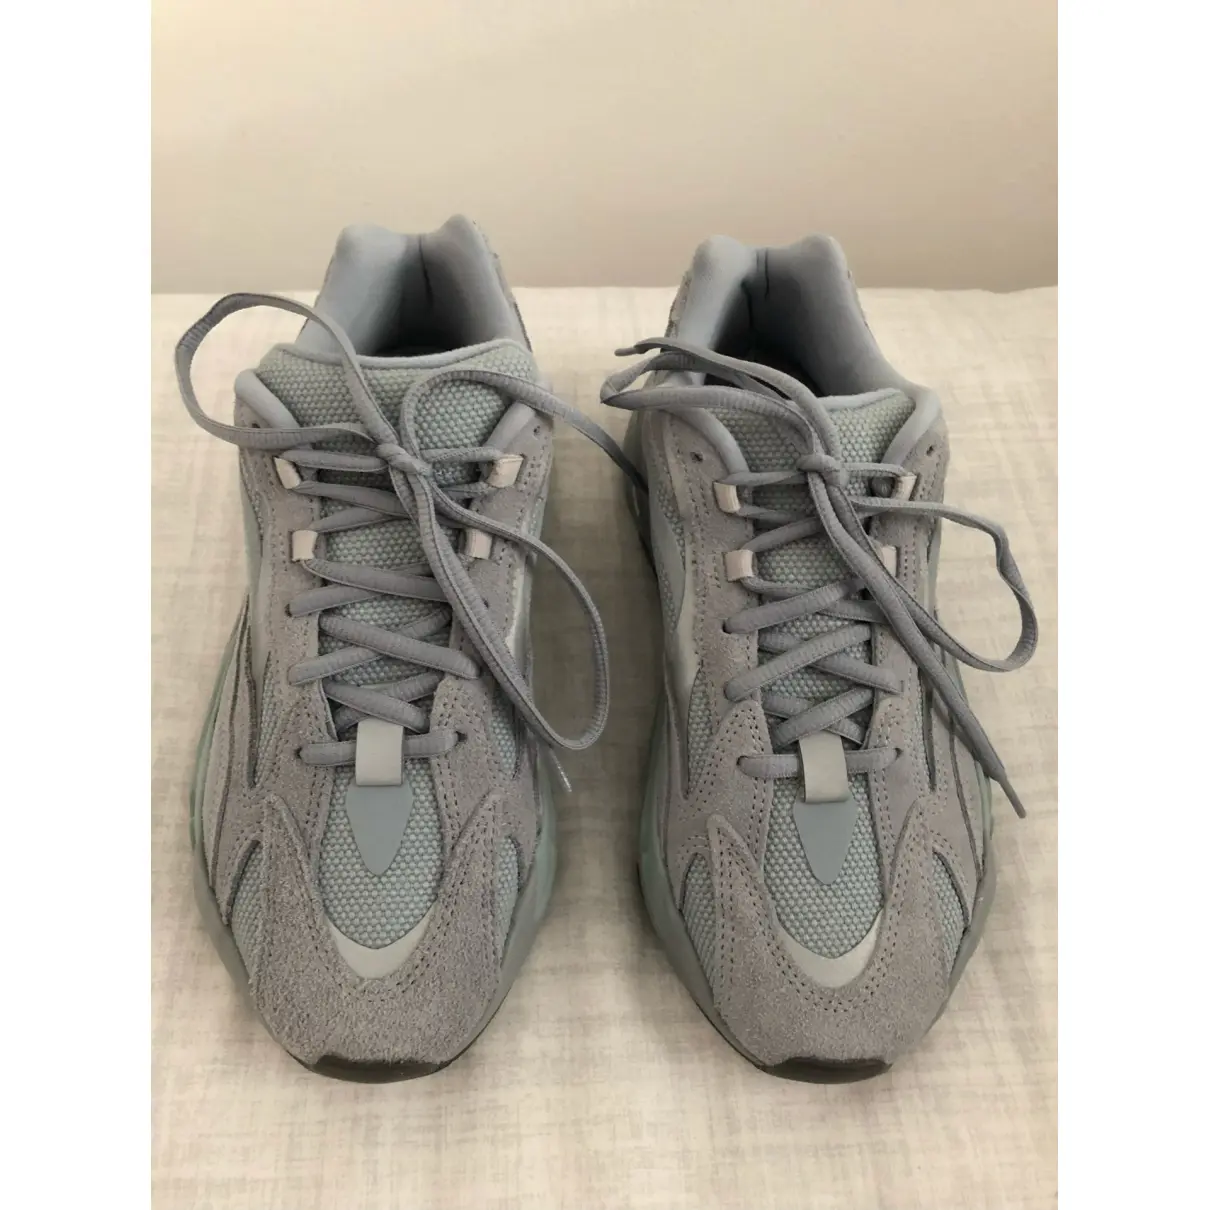 Buy Yeezy x Adidas Boost 700 V2 trainers online